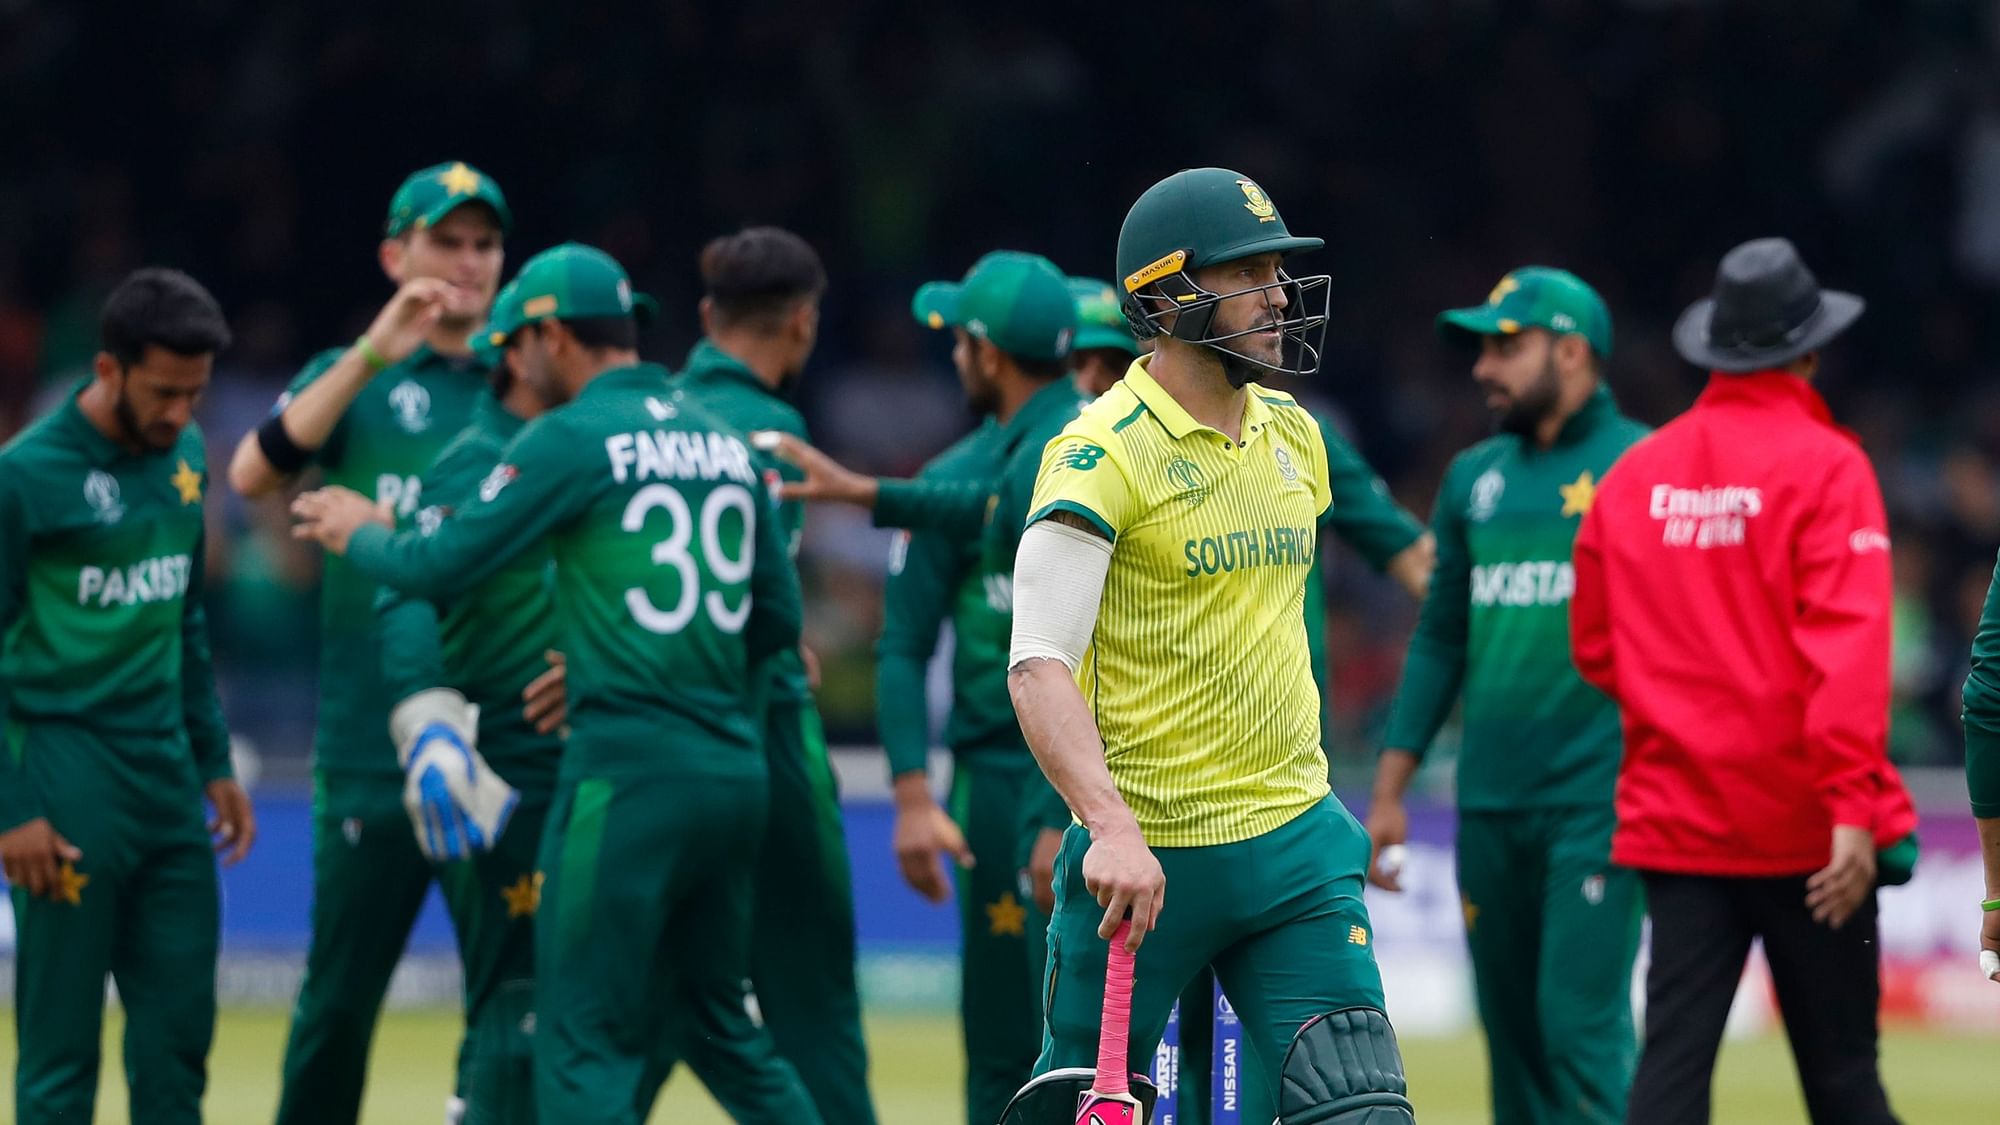 South Africa have been knocked out of the World Cup after a 49-run loss to Pakistan.